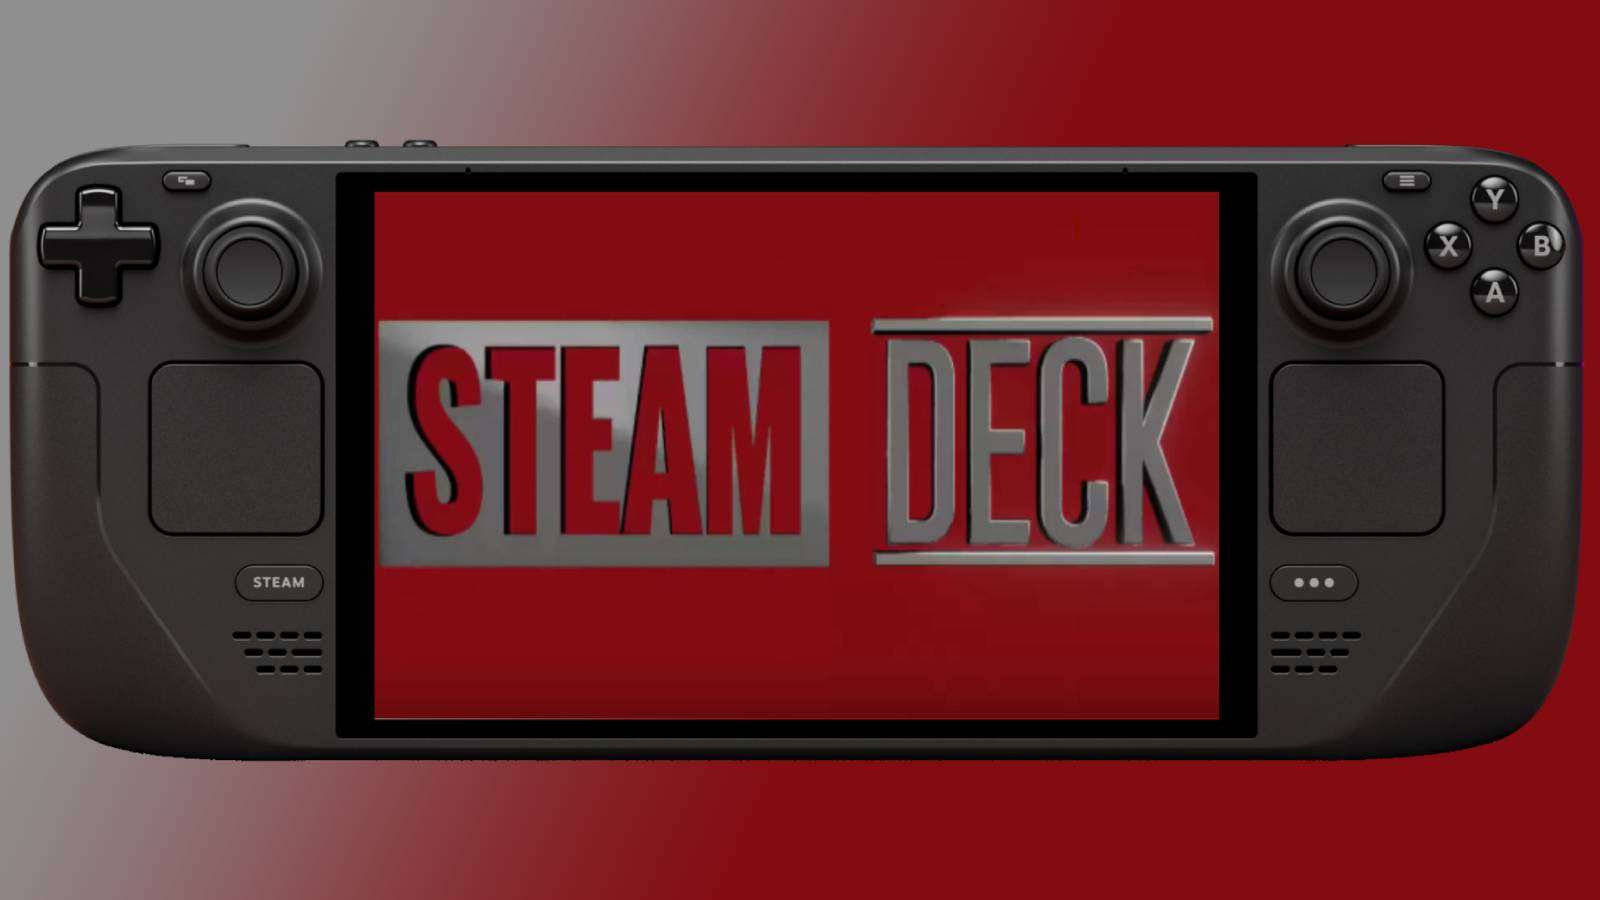 The MCU custom startup movie logo on the screen of a Steam Deck OLED.